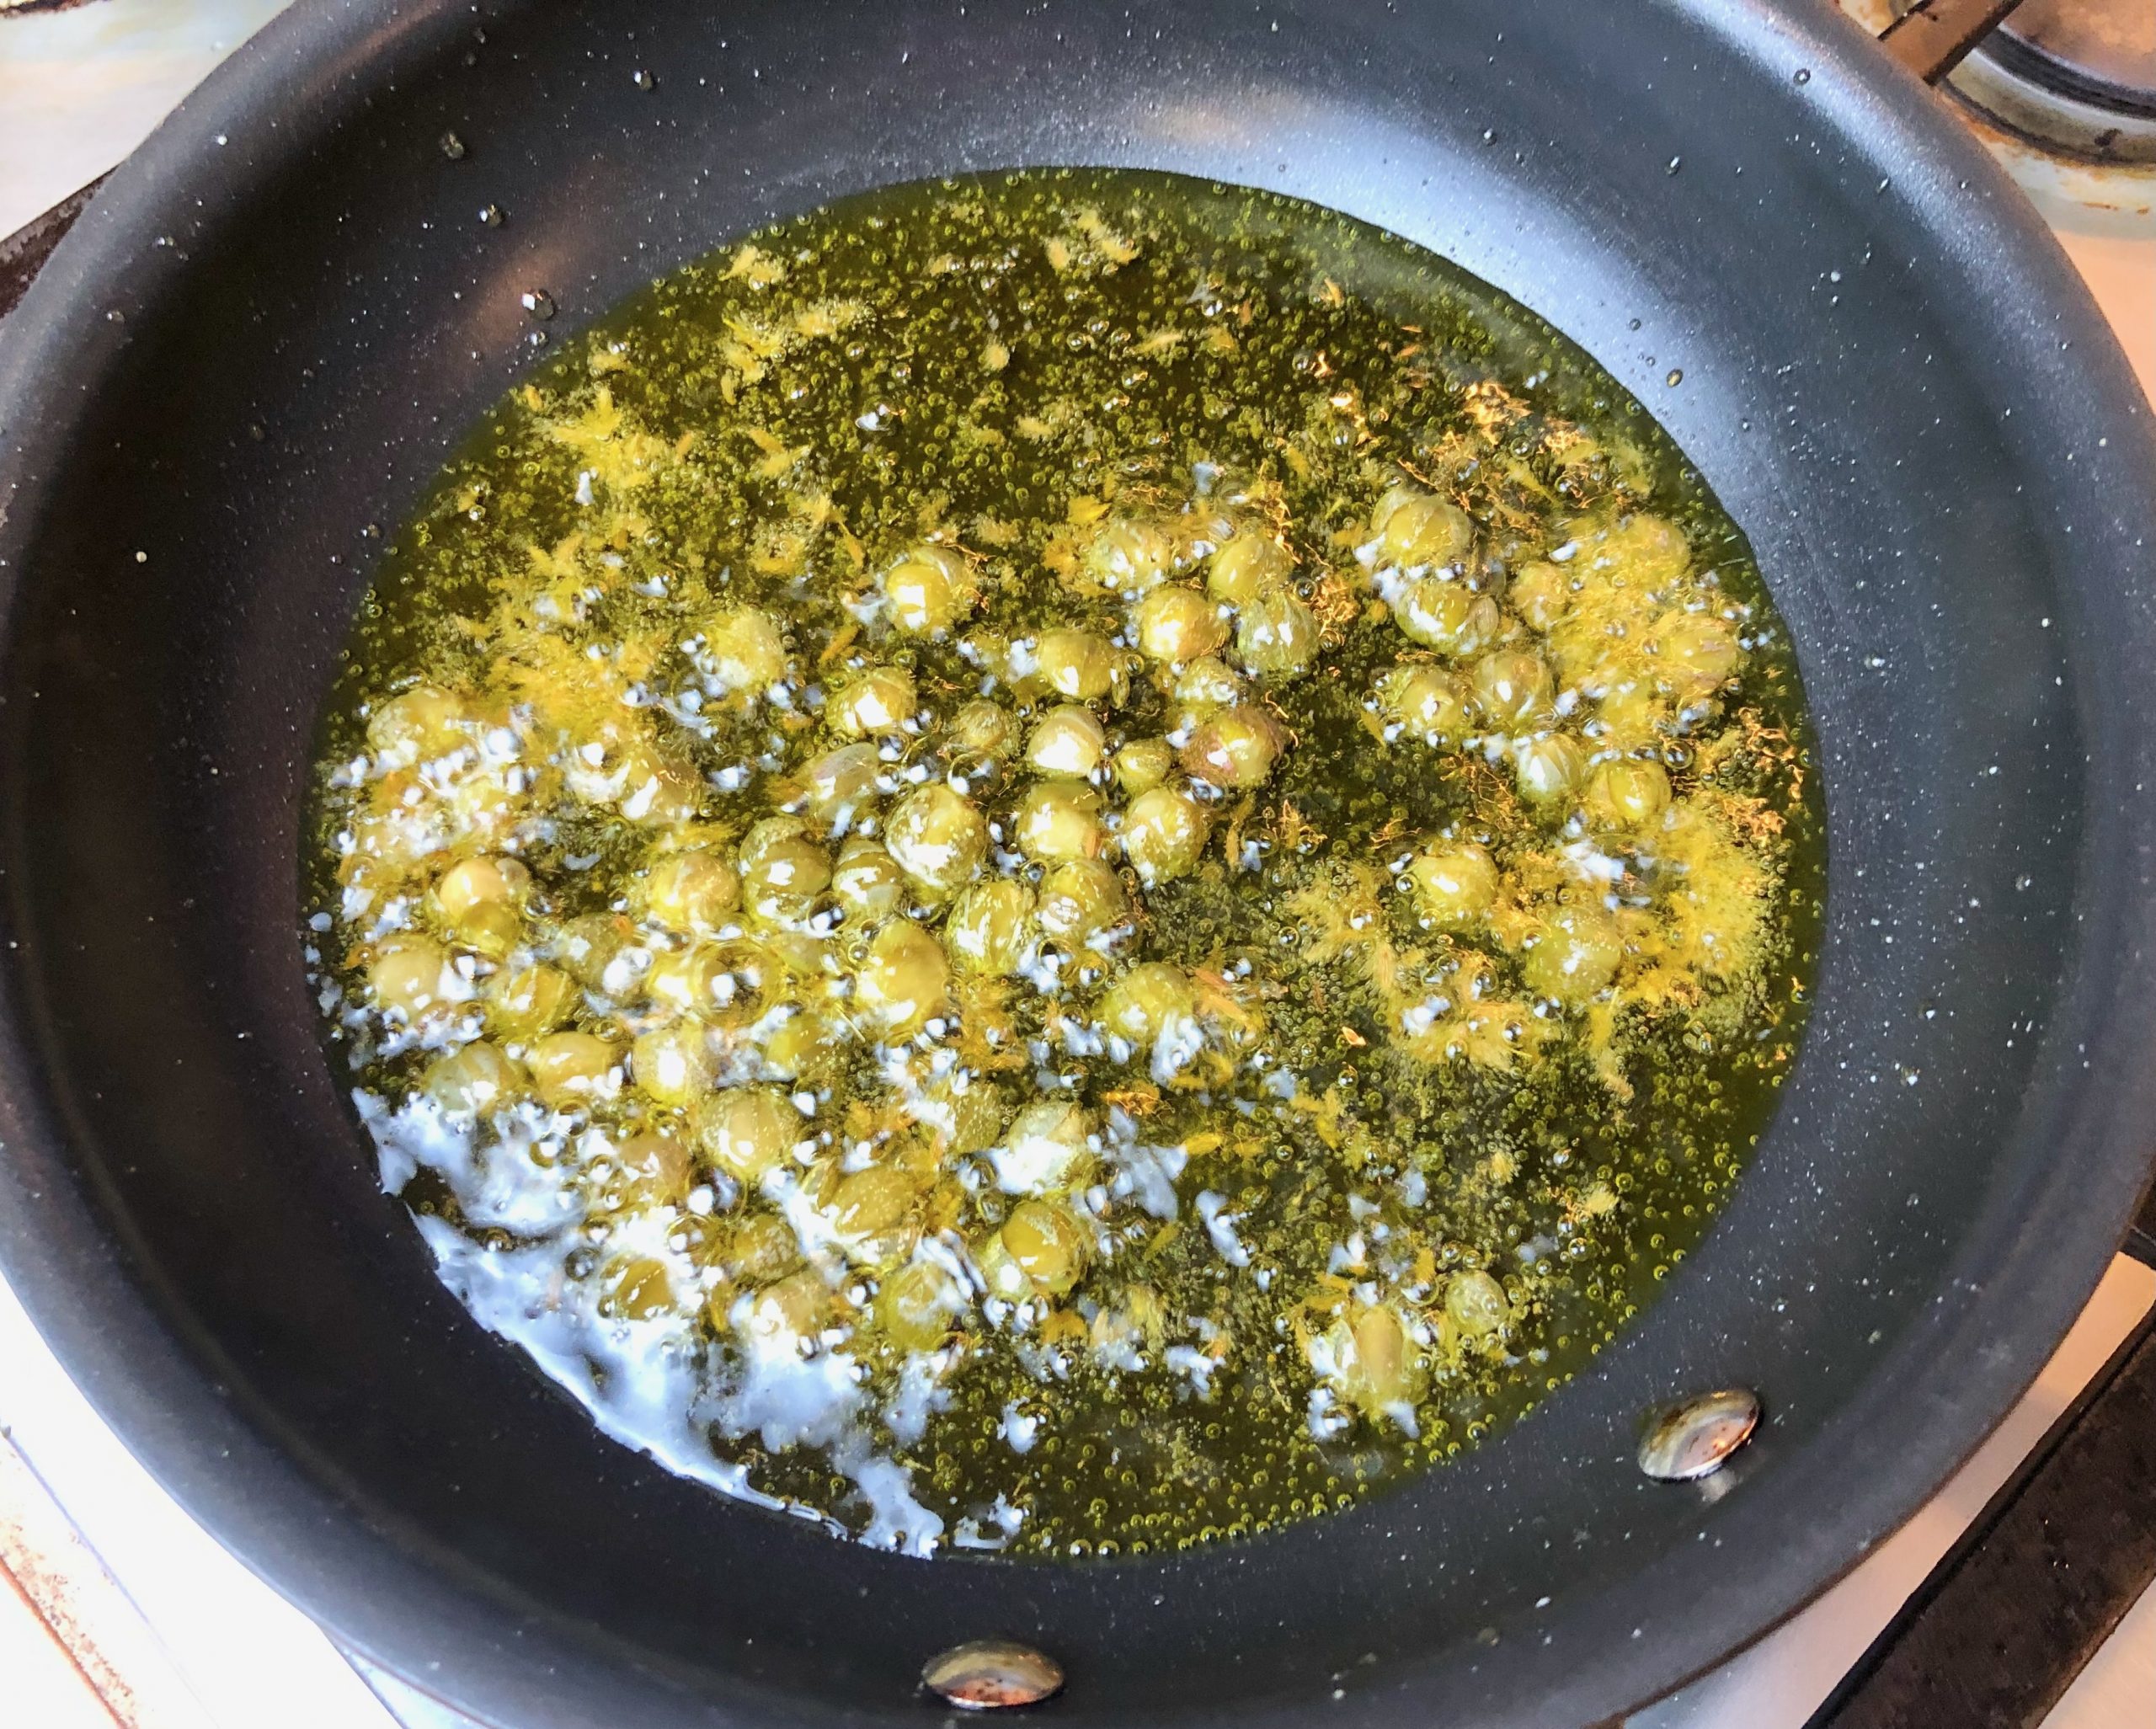 cook capers and cumin in the oil over medium heat for approx 1 min until fragrant